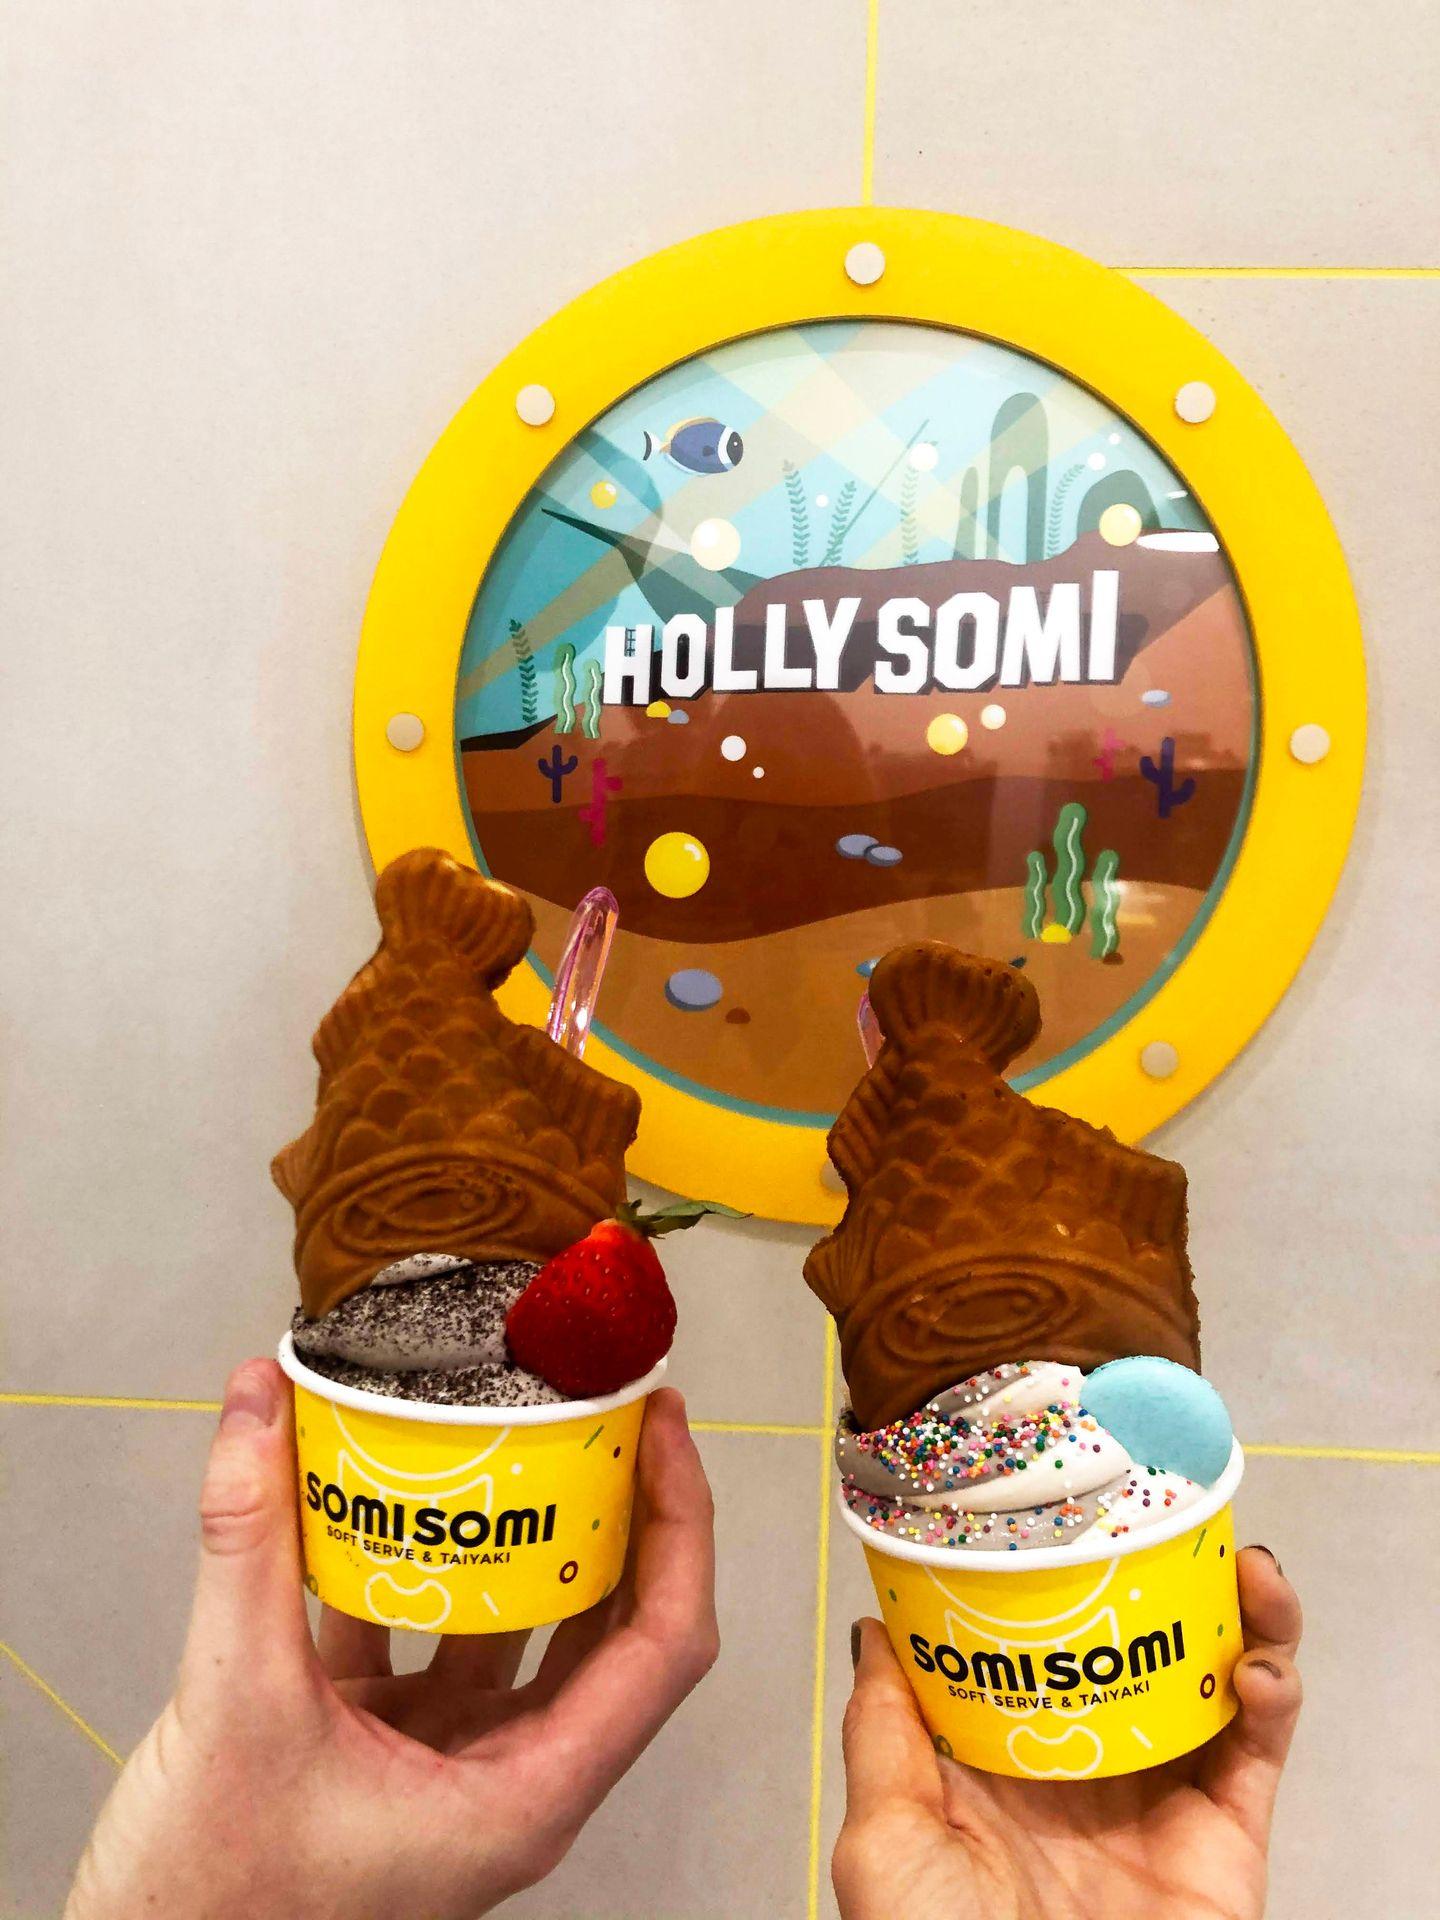 Two hands holding cups of cream with a taiyaki cone shaped like a fish on top. A sign reads "Hollysomi" in the background.